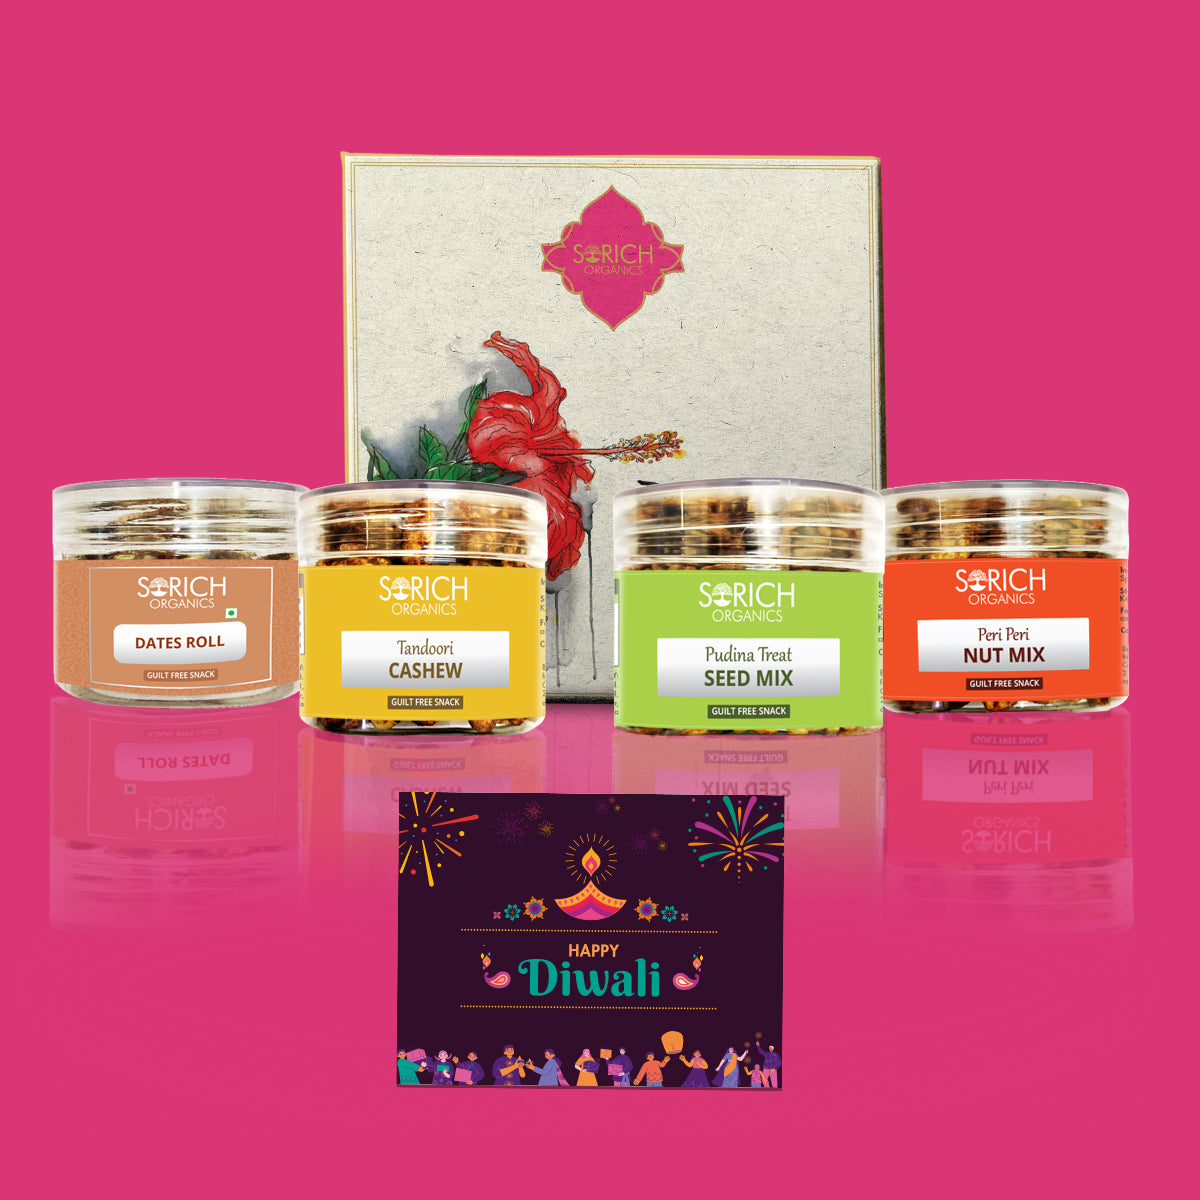 Diwali Special Imperial Gift hamper for Family and Friends | Tandoori Cashew 150g, Pudina Seeds Mix 150g,  Dates Roll 150g, Peri Peri Nut Mix 150g